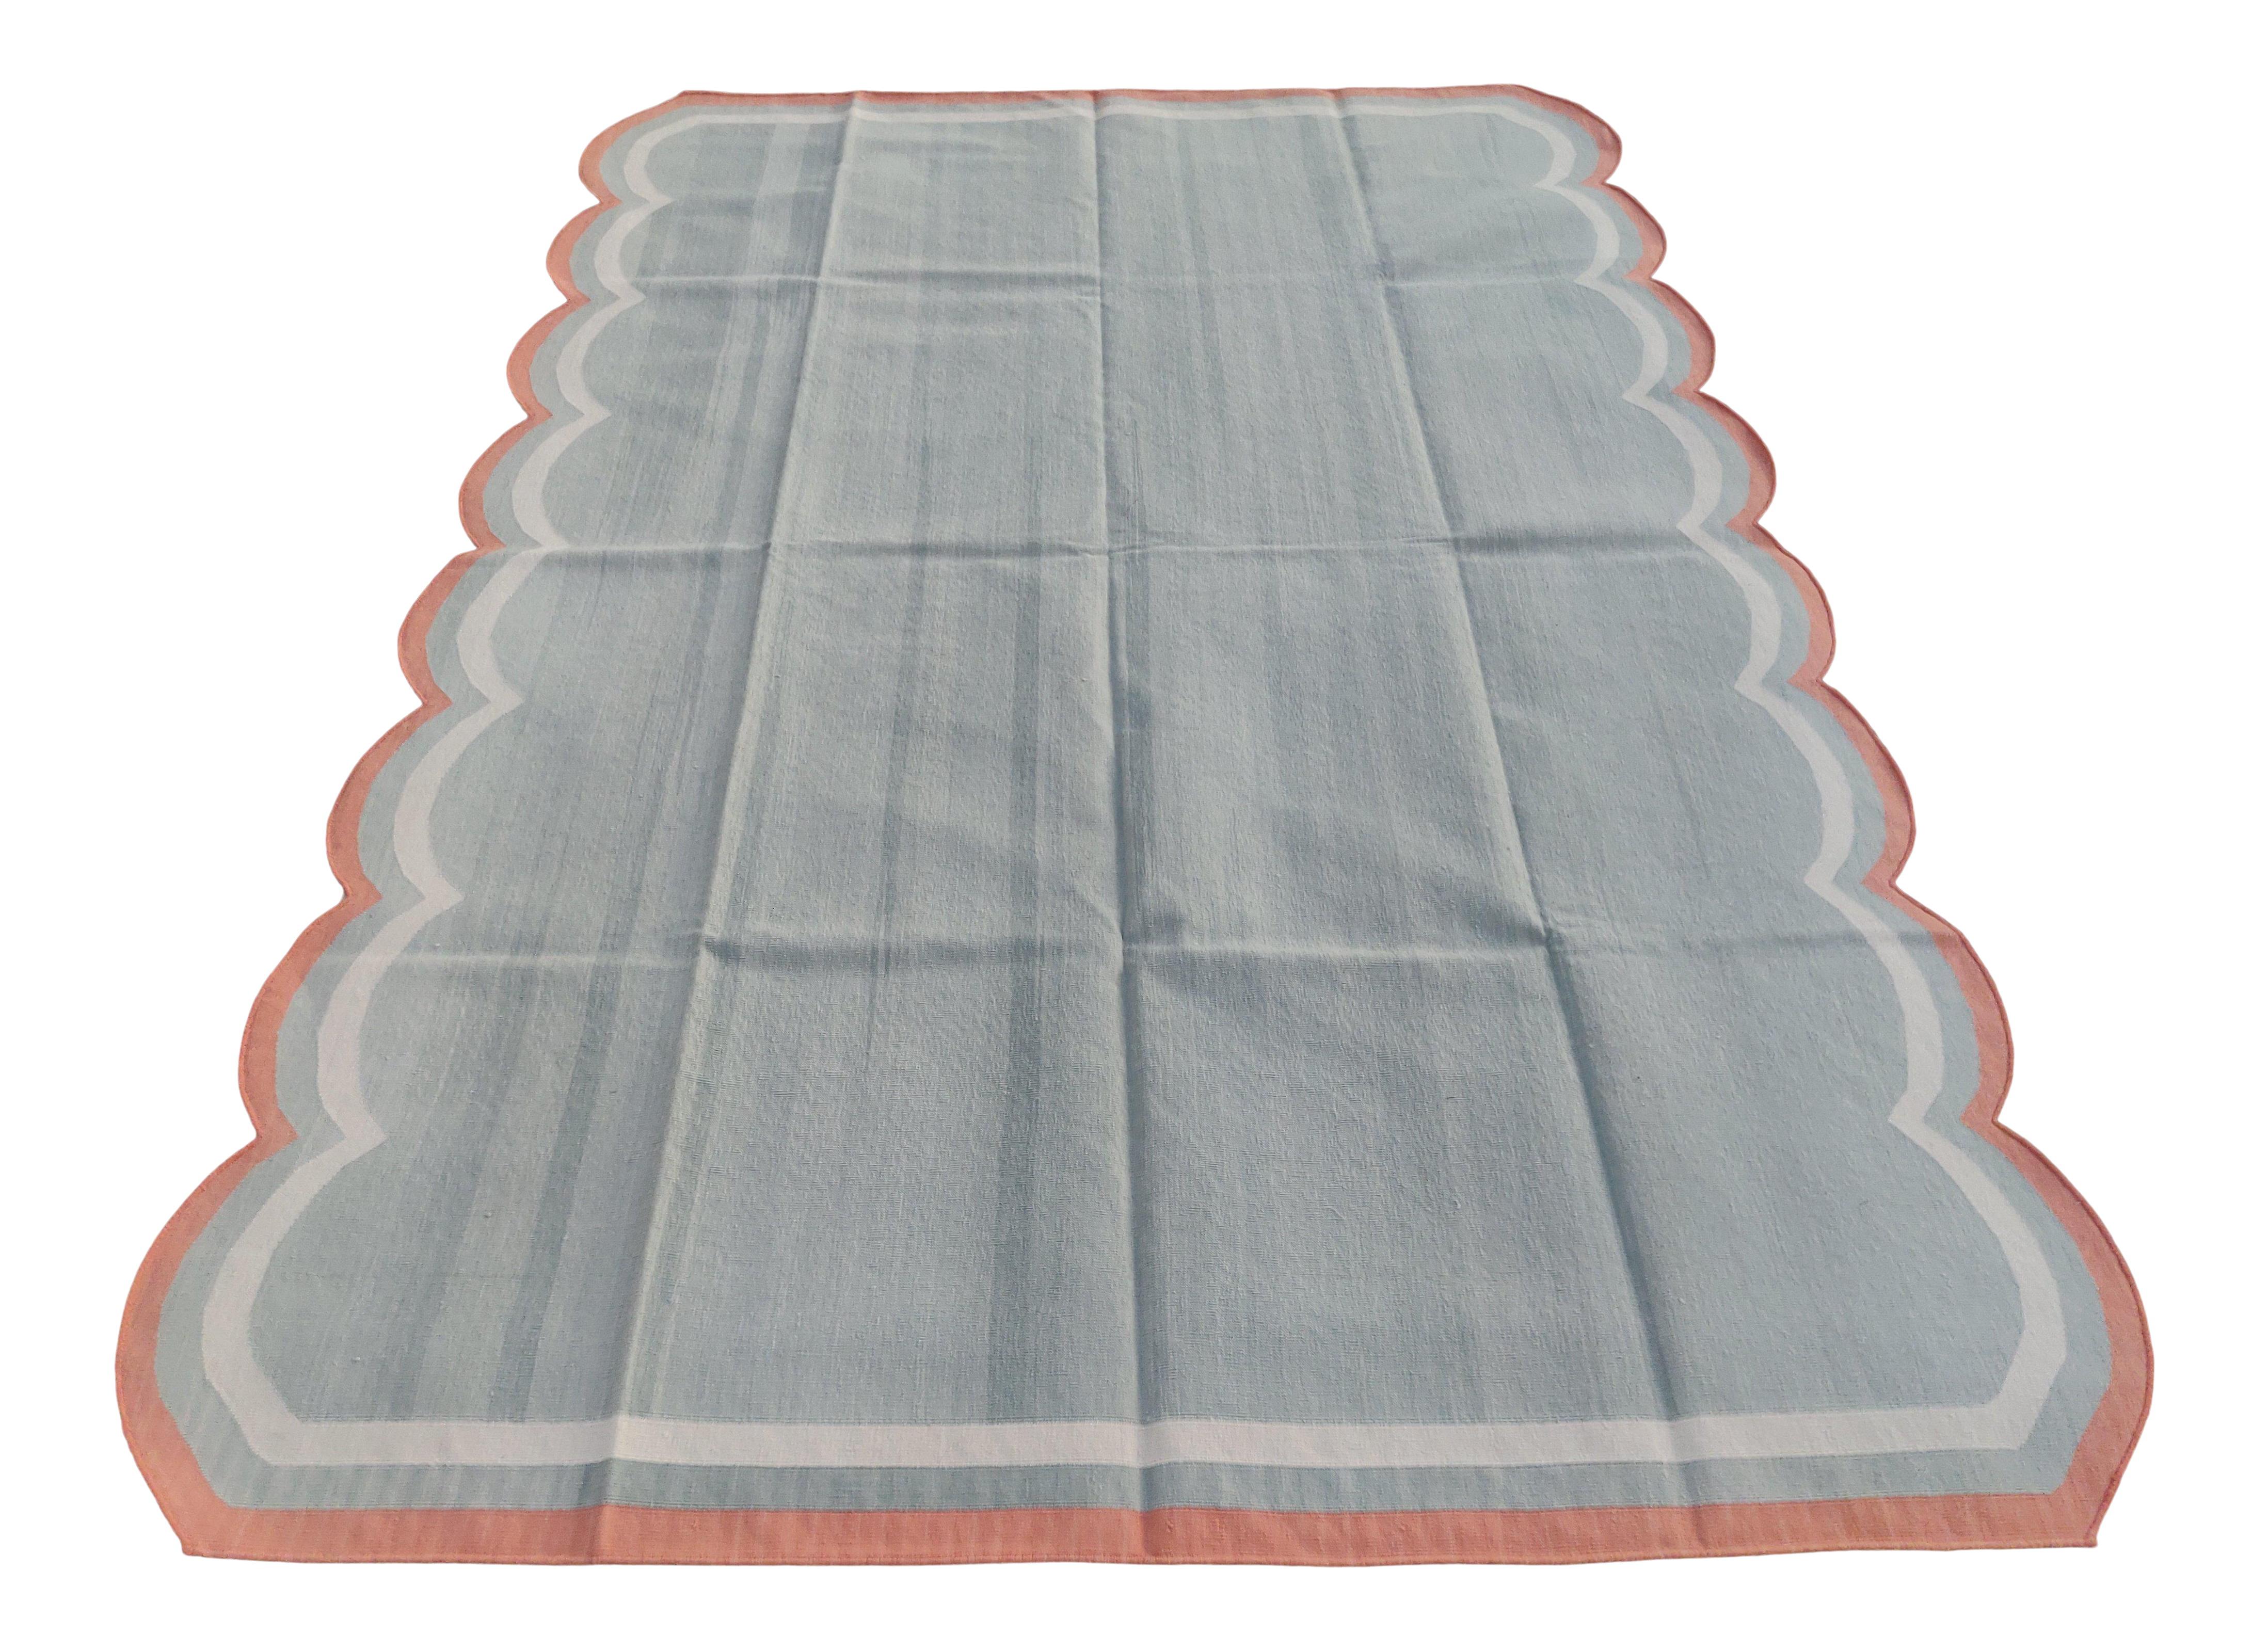 Cotton Vegetable Dyed Pale Aqua And Coral Scalloped Striped Indian Dhurrie Rug-6'x9' 
These special flat-weave dhurries are hand-woven with 15 ply 100% cotton yarn. Due to the special manufacturing techniques used to create our rugs, the size and